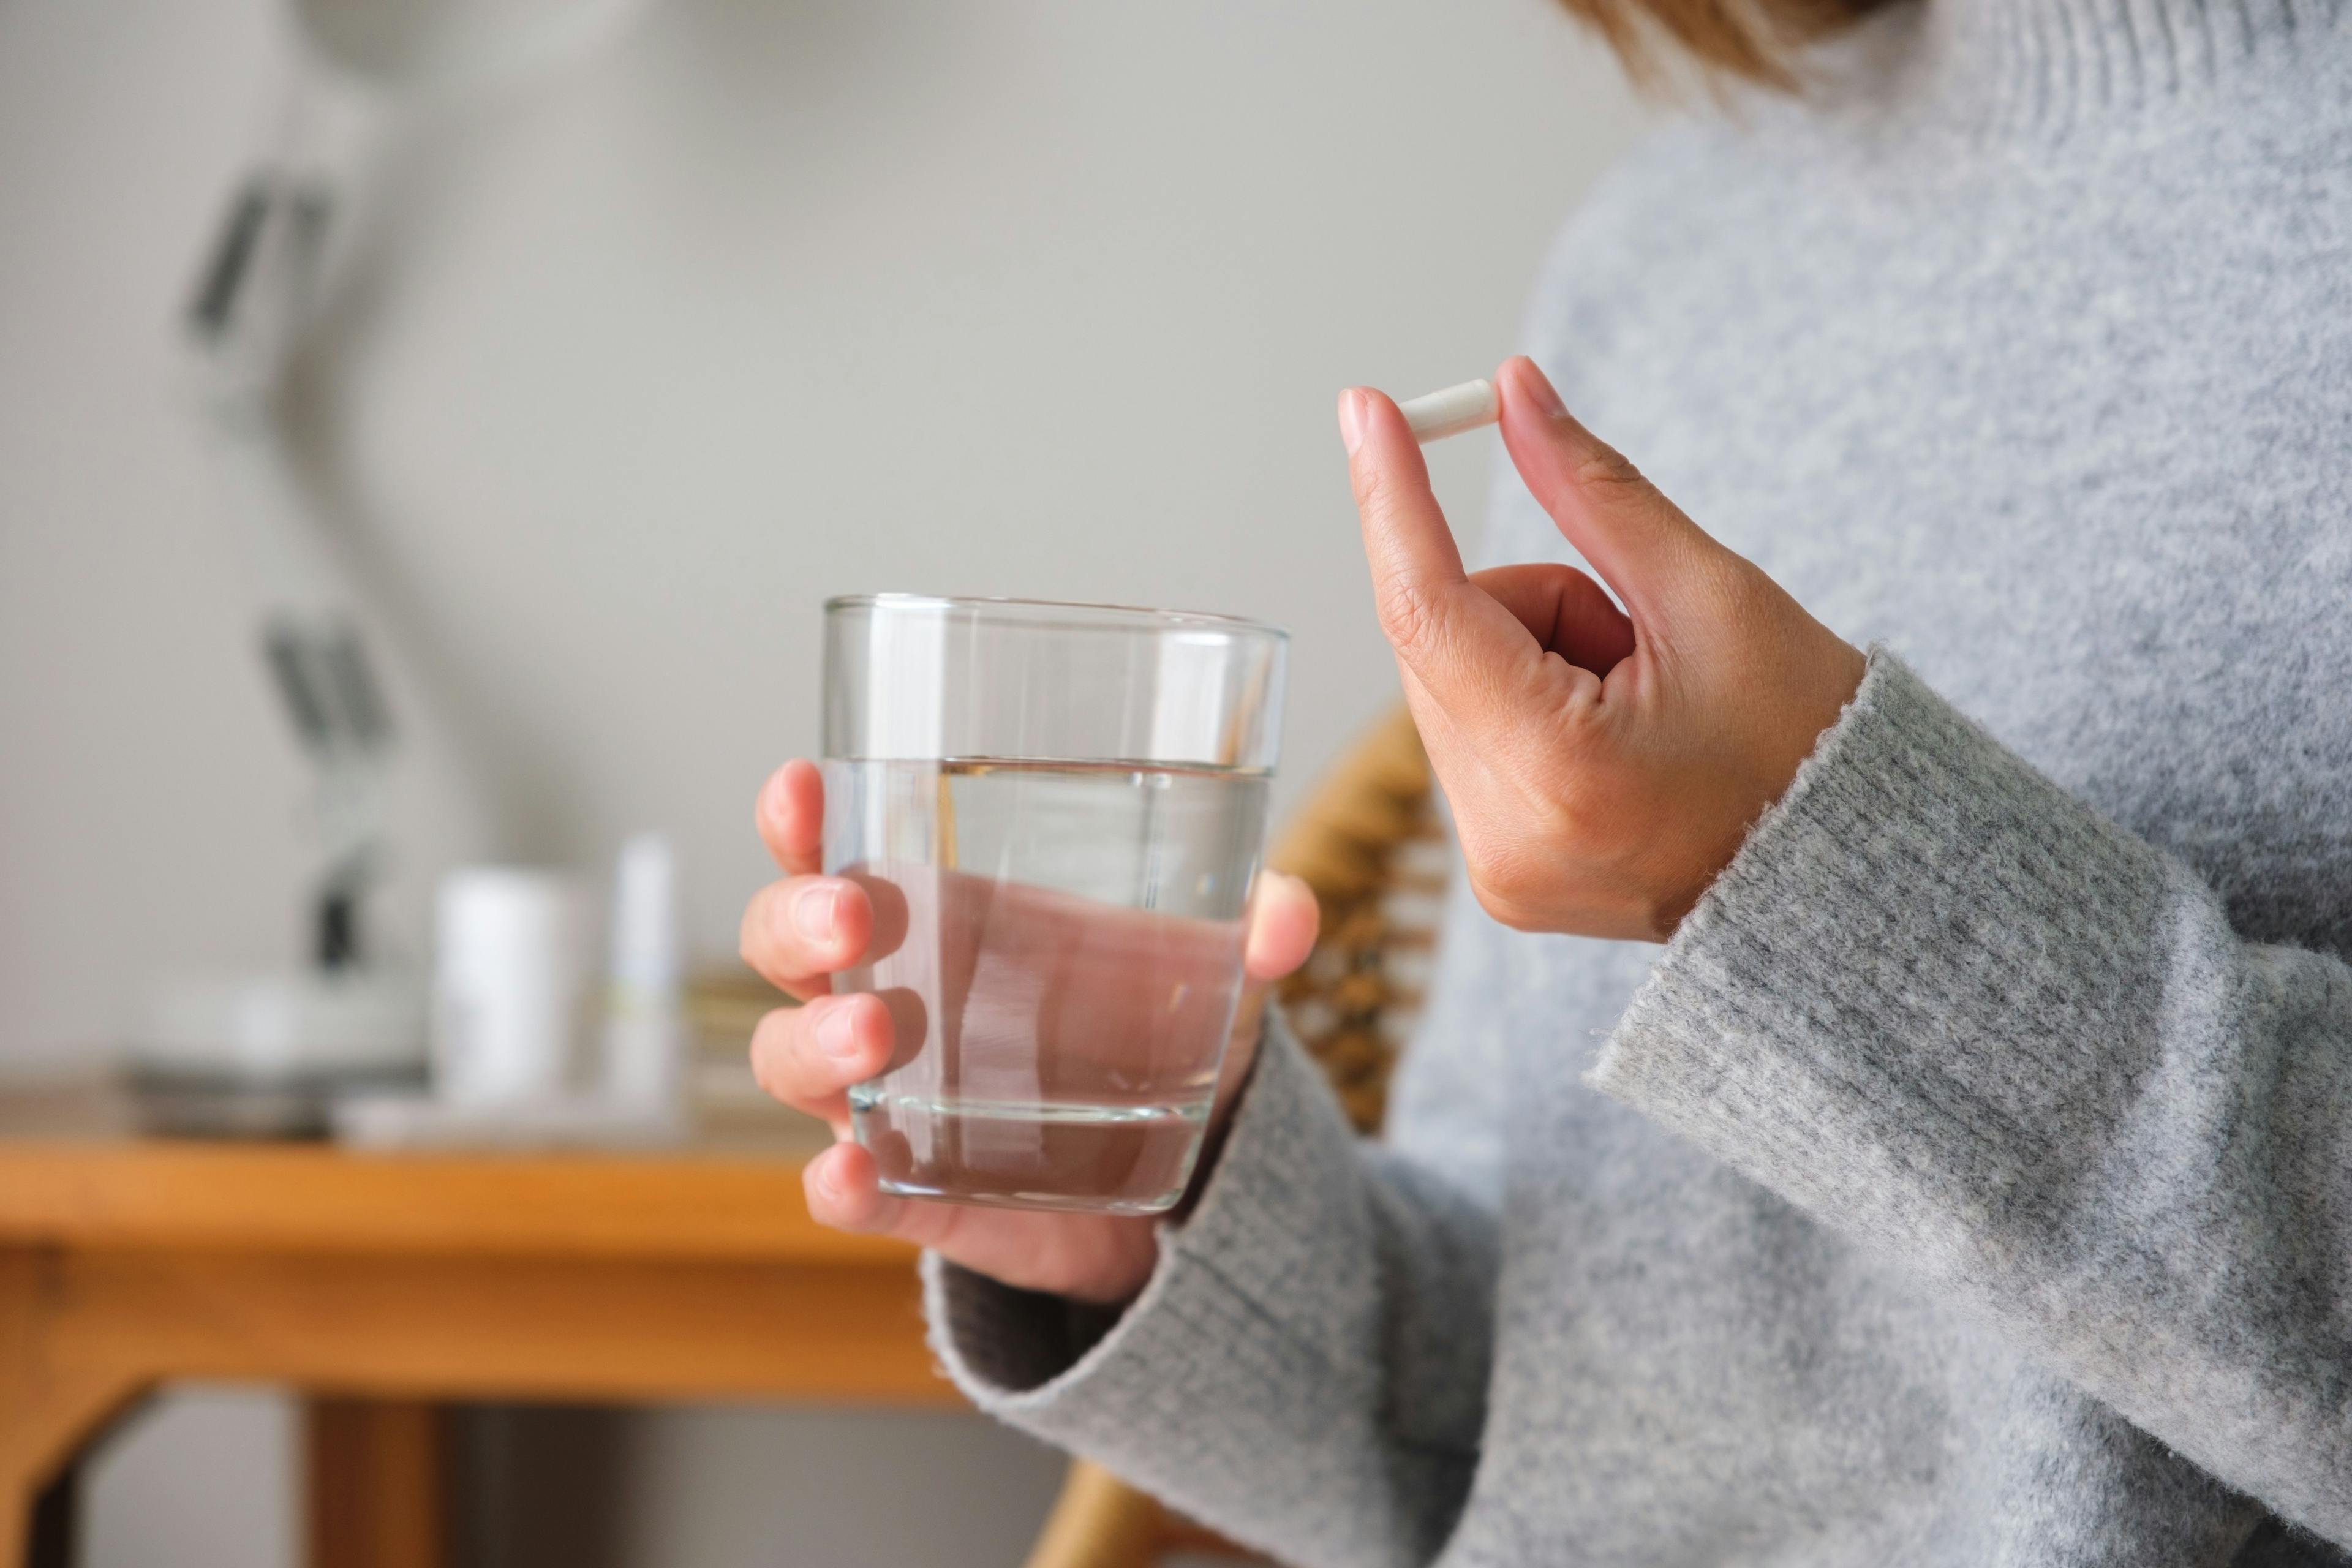 Woman holding an oral antibiotic and a glass of water